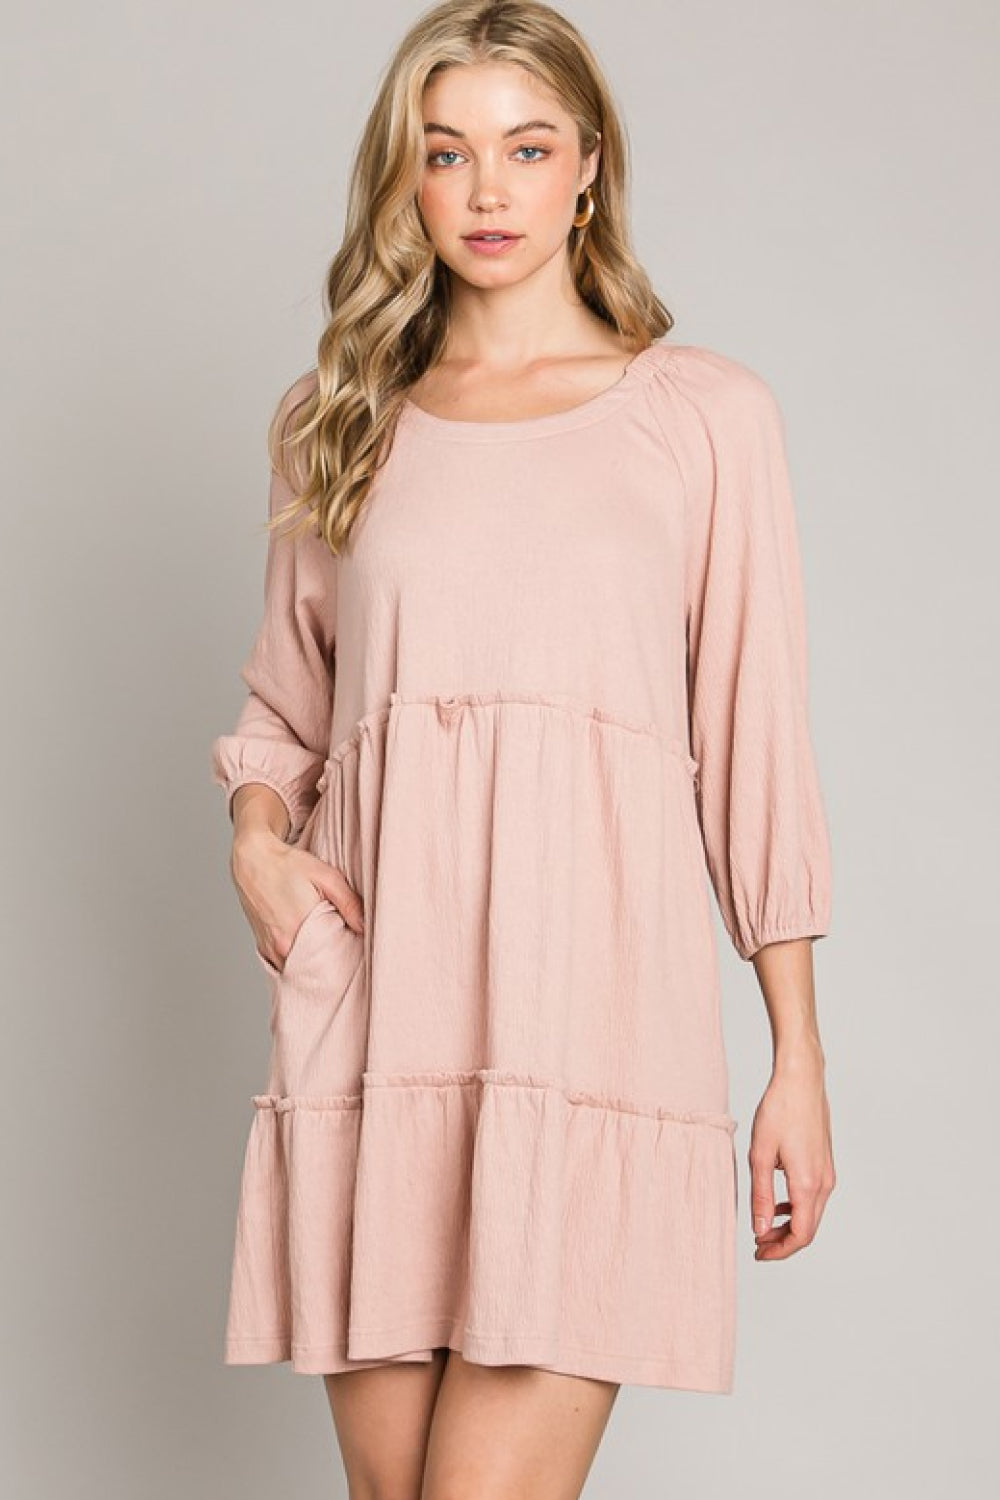 Tiered Tie-Back Dress (Rayon/Poly/Spandex) (Sizes: S - 3XL) (Sale Price: $88.39 CAD)